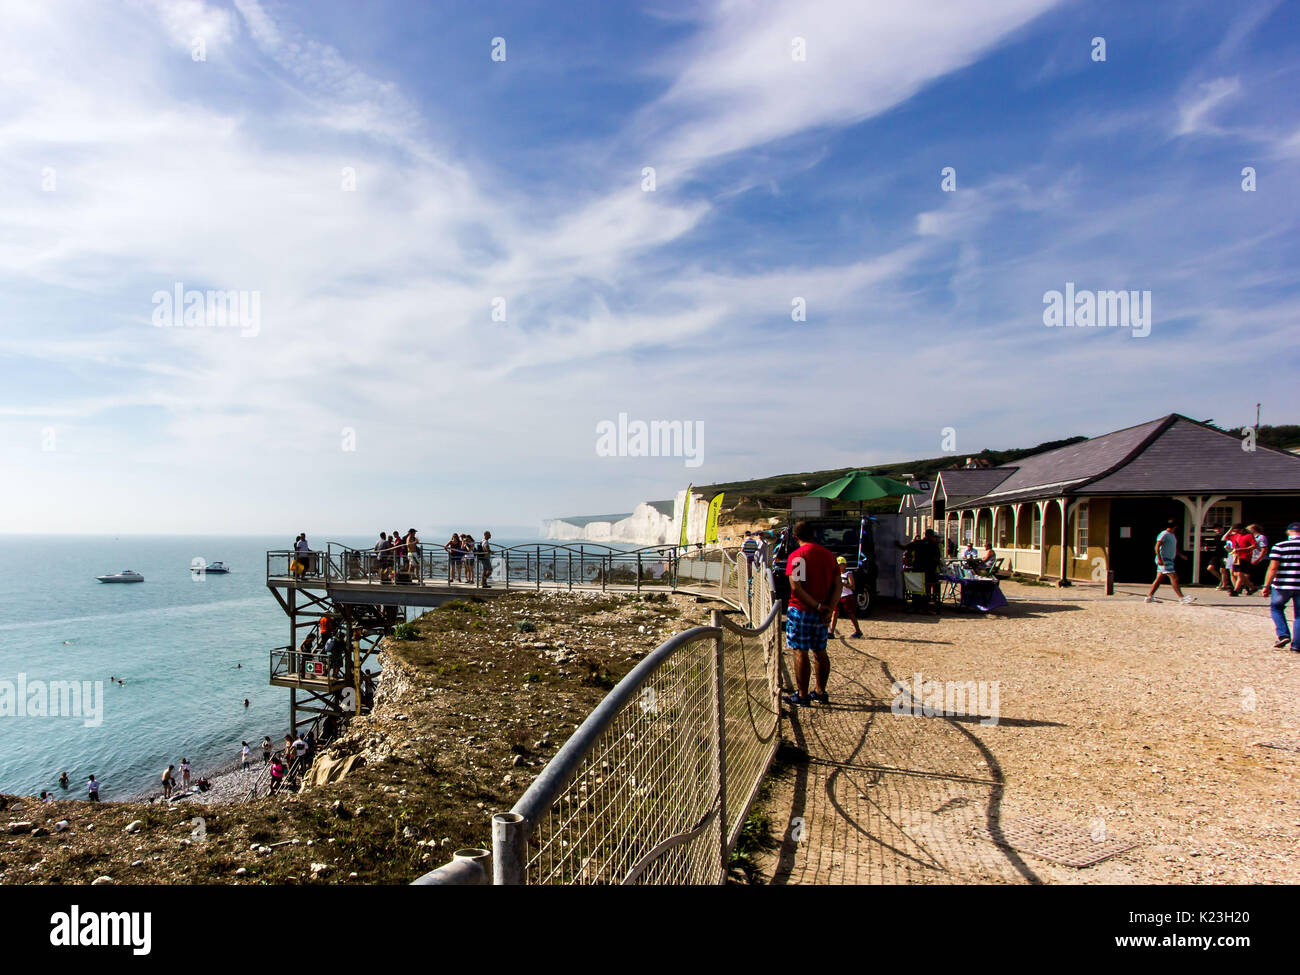 Birling Gap, East Sussex, United Kingdom. 28th Aug, 2017. Twenty four hours after an unidentified gas cloud drifted in from the sea resulting in over 100 people needing hospital treatment for eye and breathing problems, holidaymakers return to this South Coast beauty spot to enjoy the August bank holiday weather. Credit: Alan Fraser/Alamy Live News Stock Photo